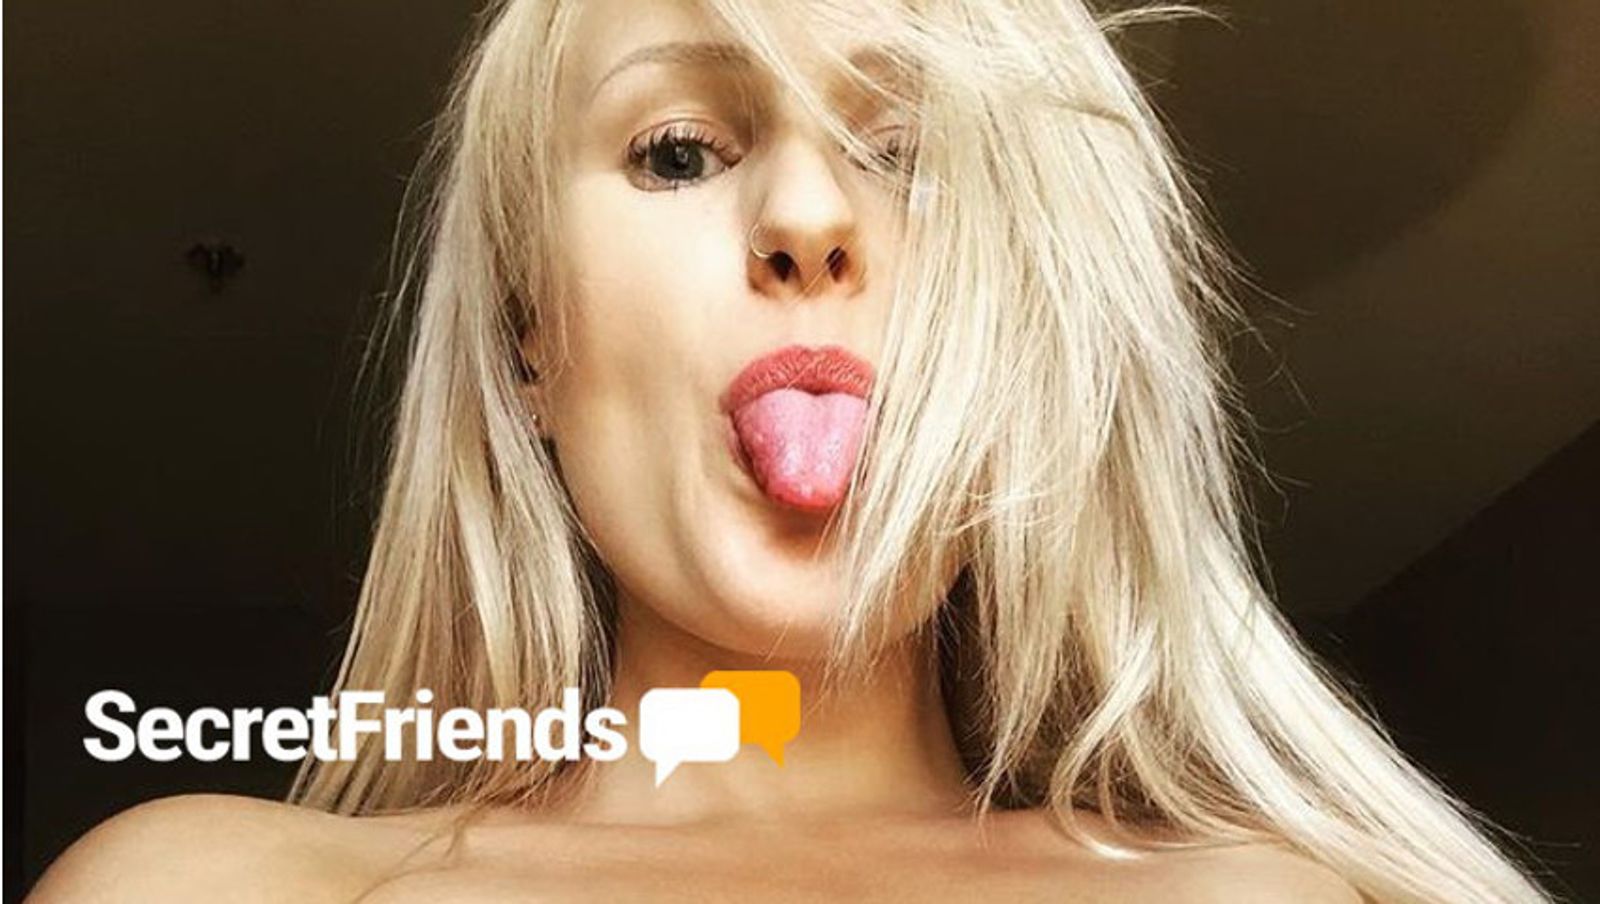 Angel Wicky to Do Live Cam Show at Secretfriends